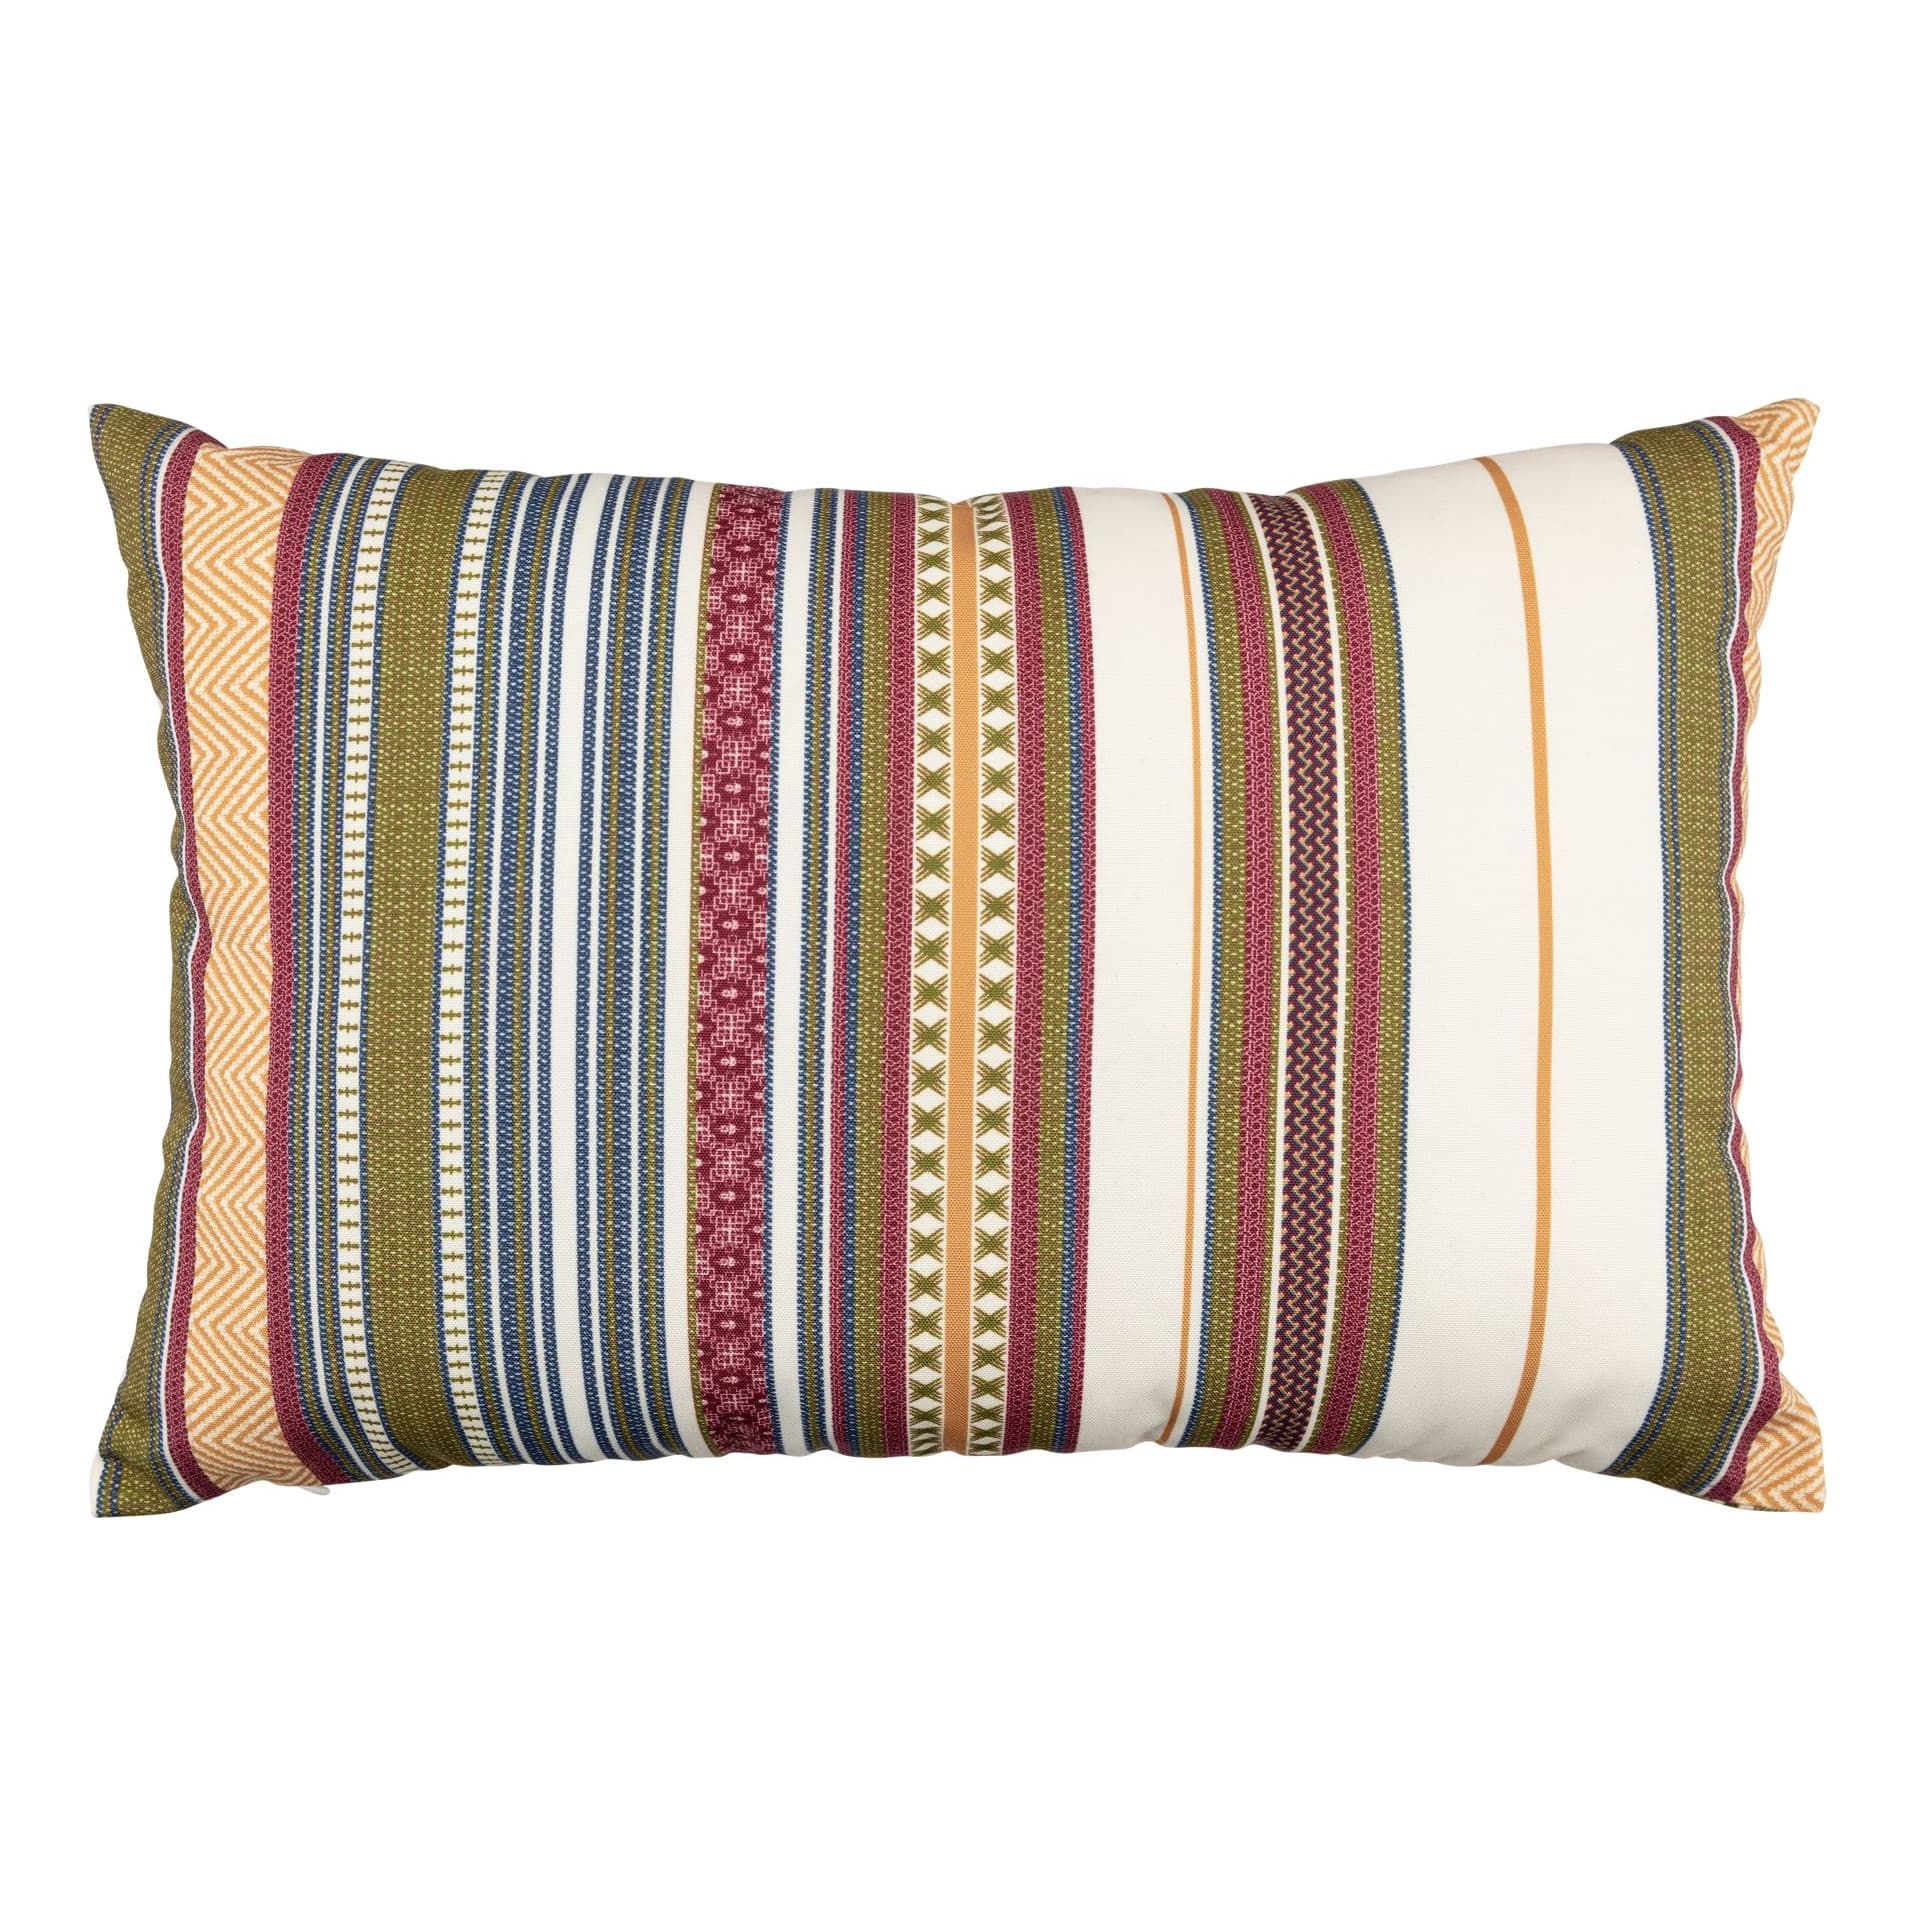 White River ™ Home Antler™ and Stripes Outdoor Decorative Pillow